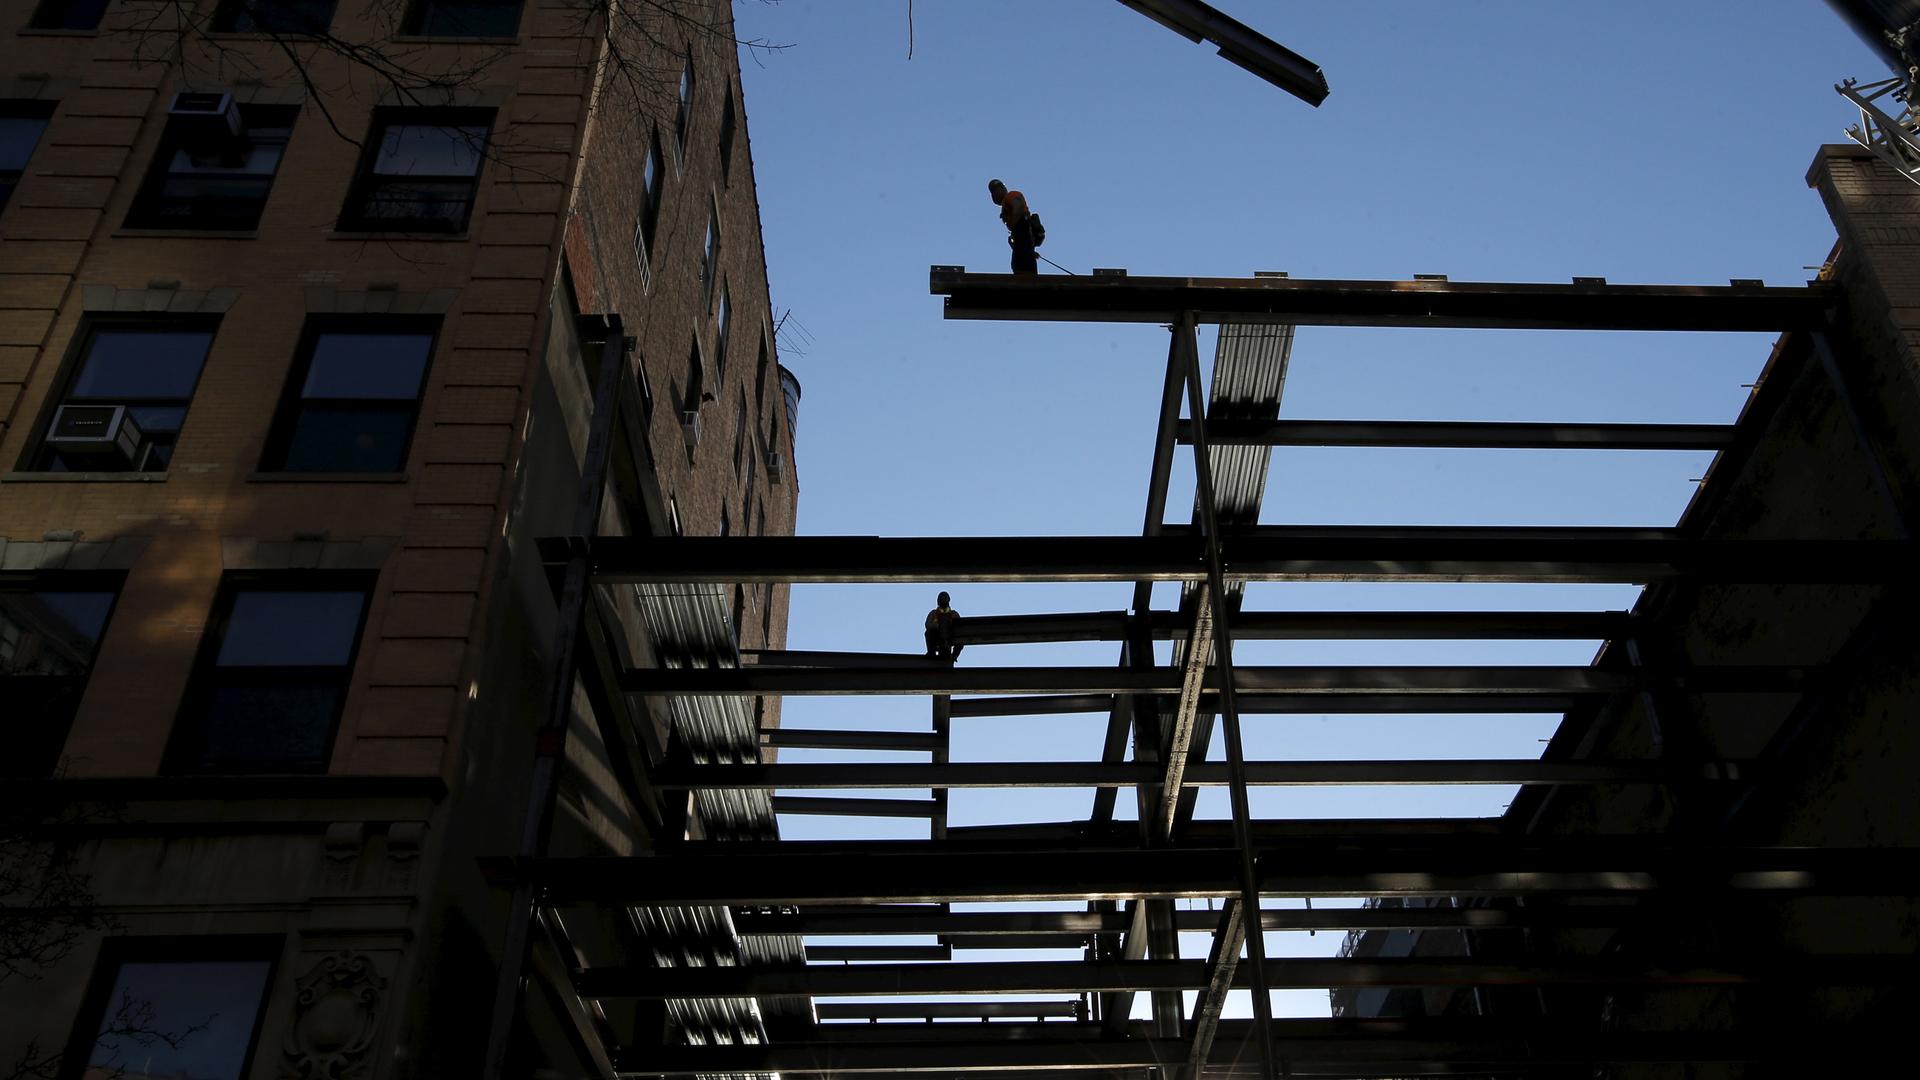 workers install US steel beams against sunlight in construction of building